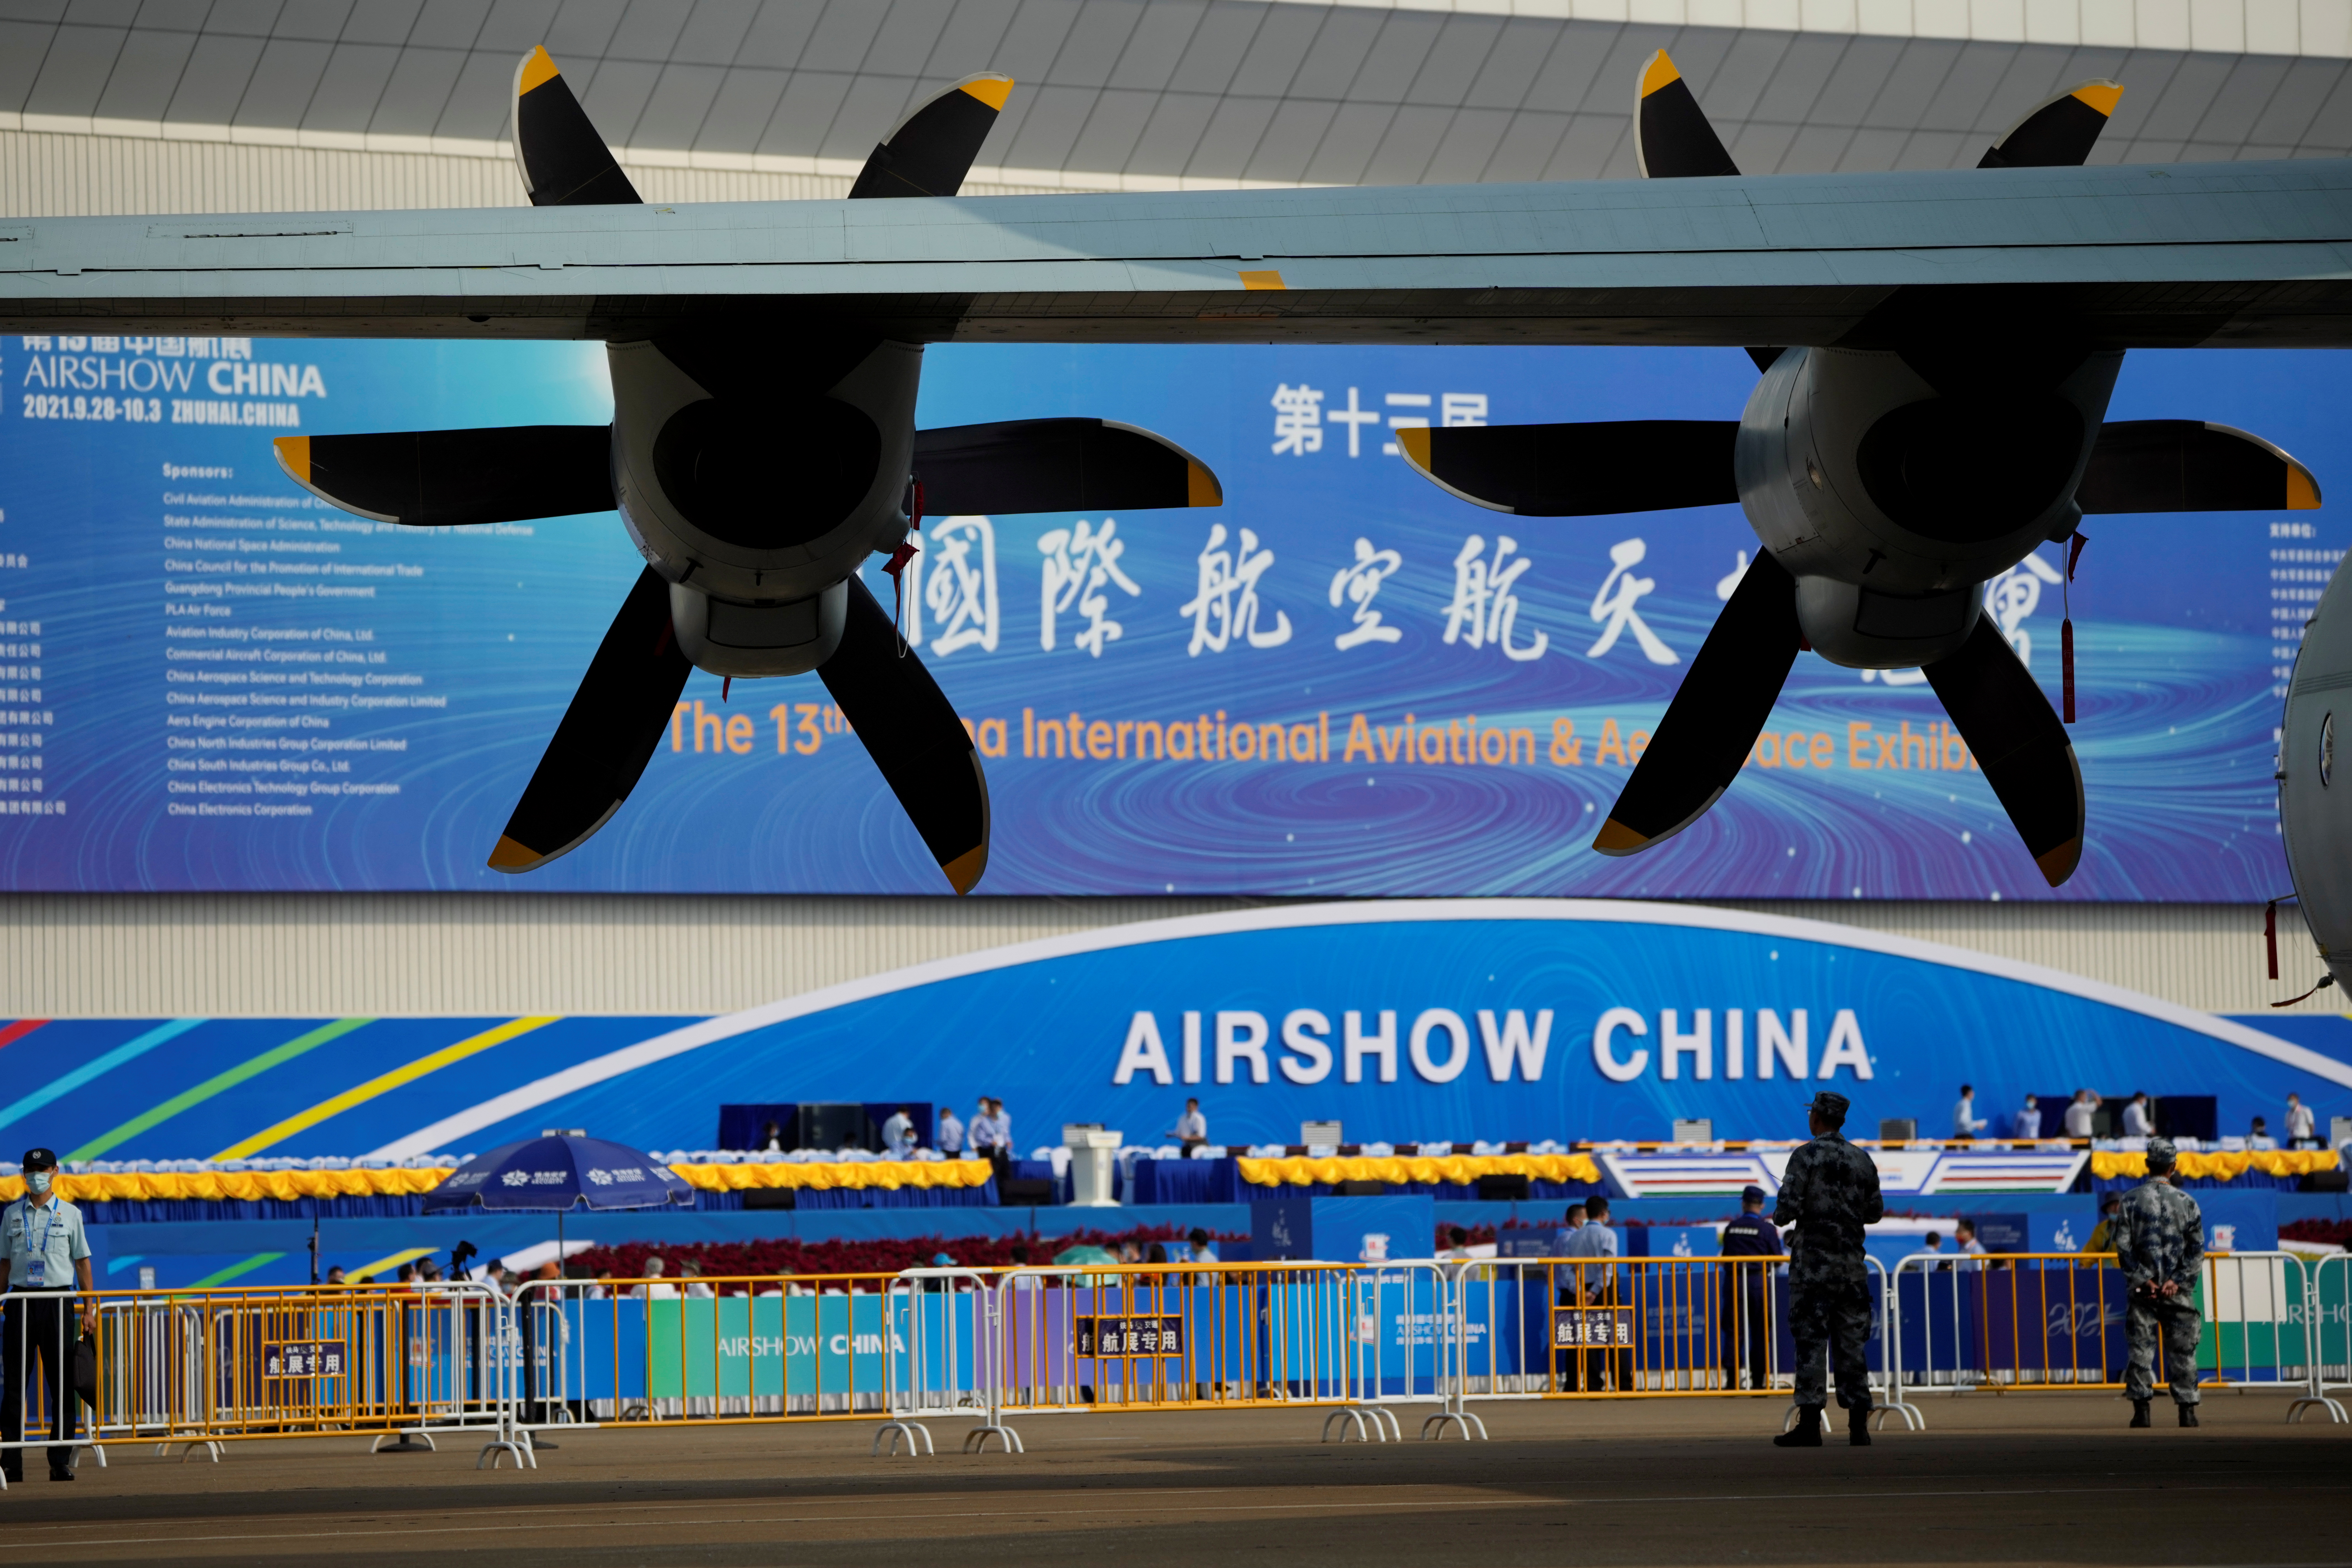 A general view of the China International Aviation and Aerospace Exhibition, or Airshow China, before its opening ceremony in Zhuhai, Guangdong province, China September 28, 2021. REUTERS/Aly Song